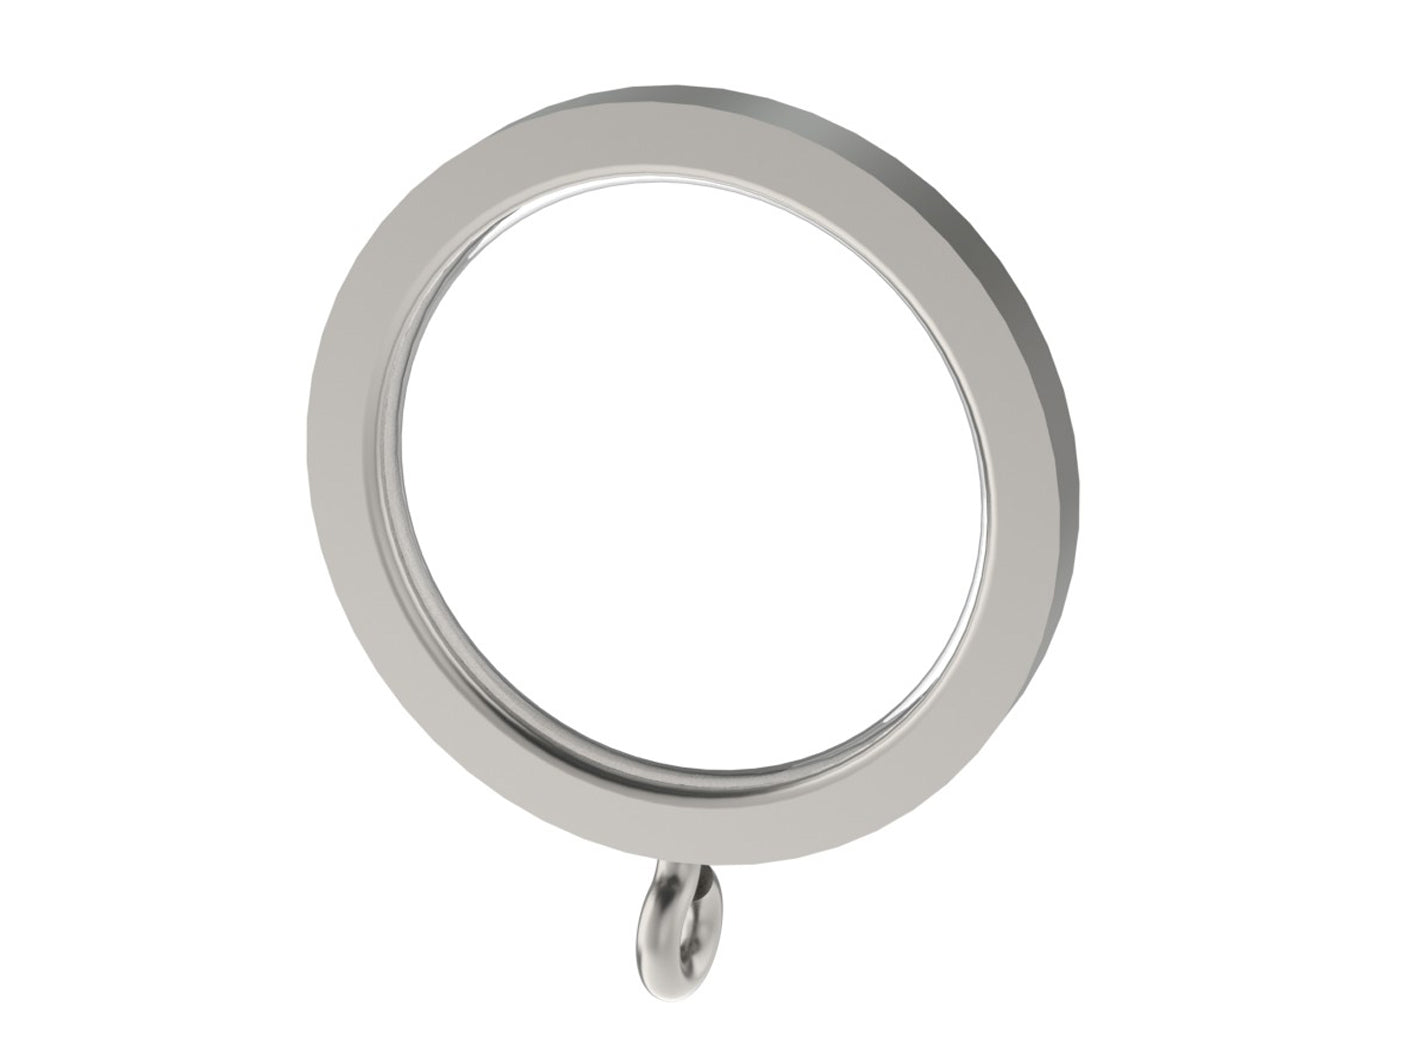 stainless steel curtain rings for 30mm curtain pole by Walcot House